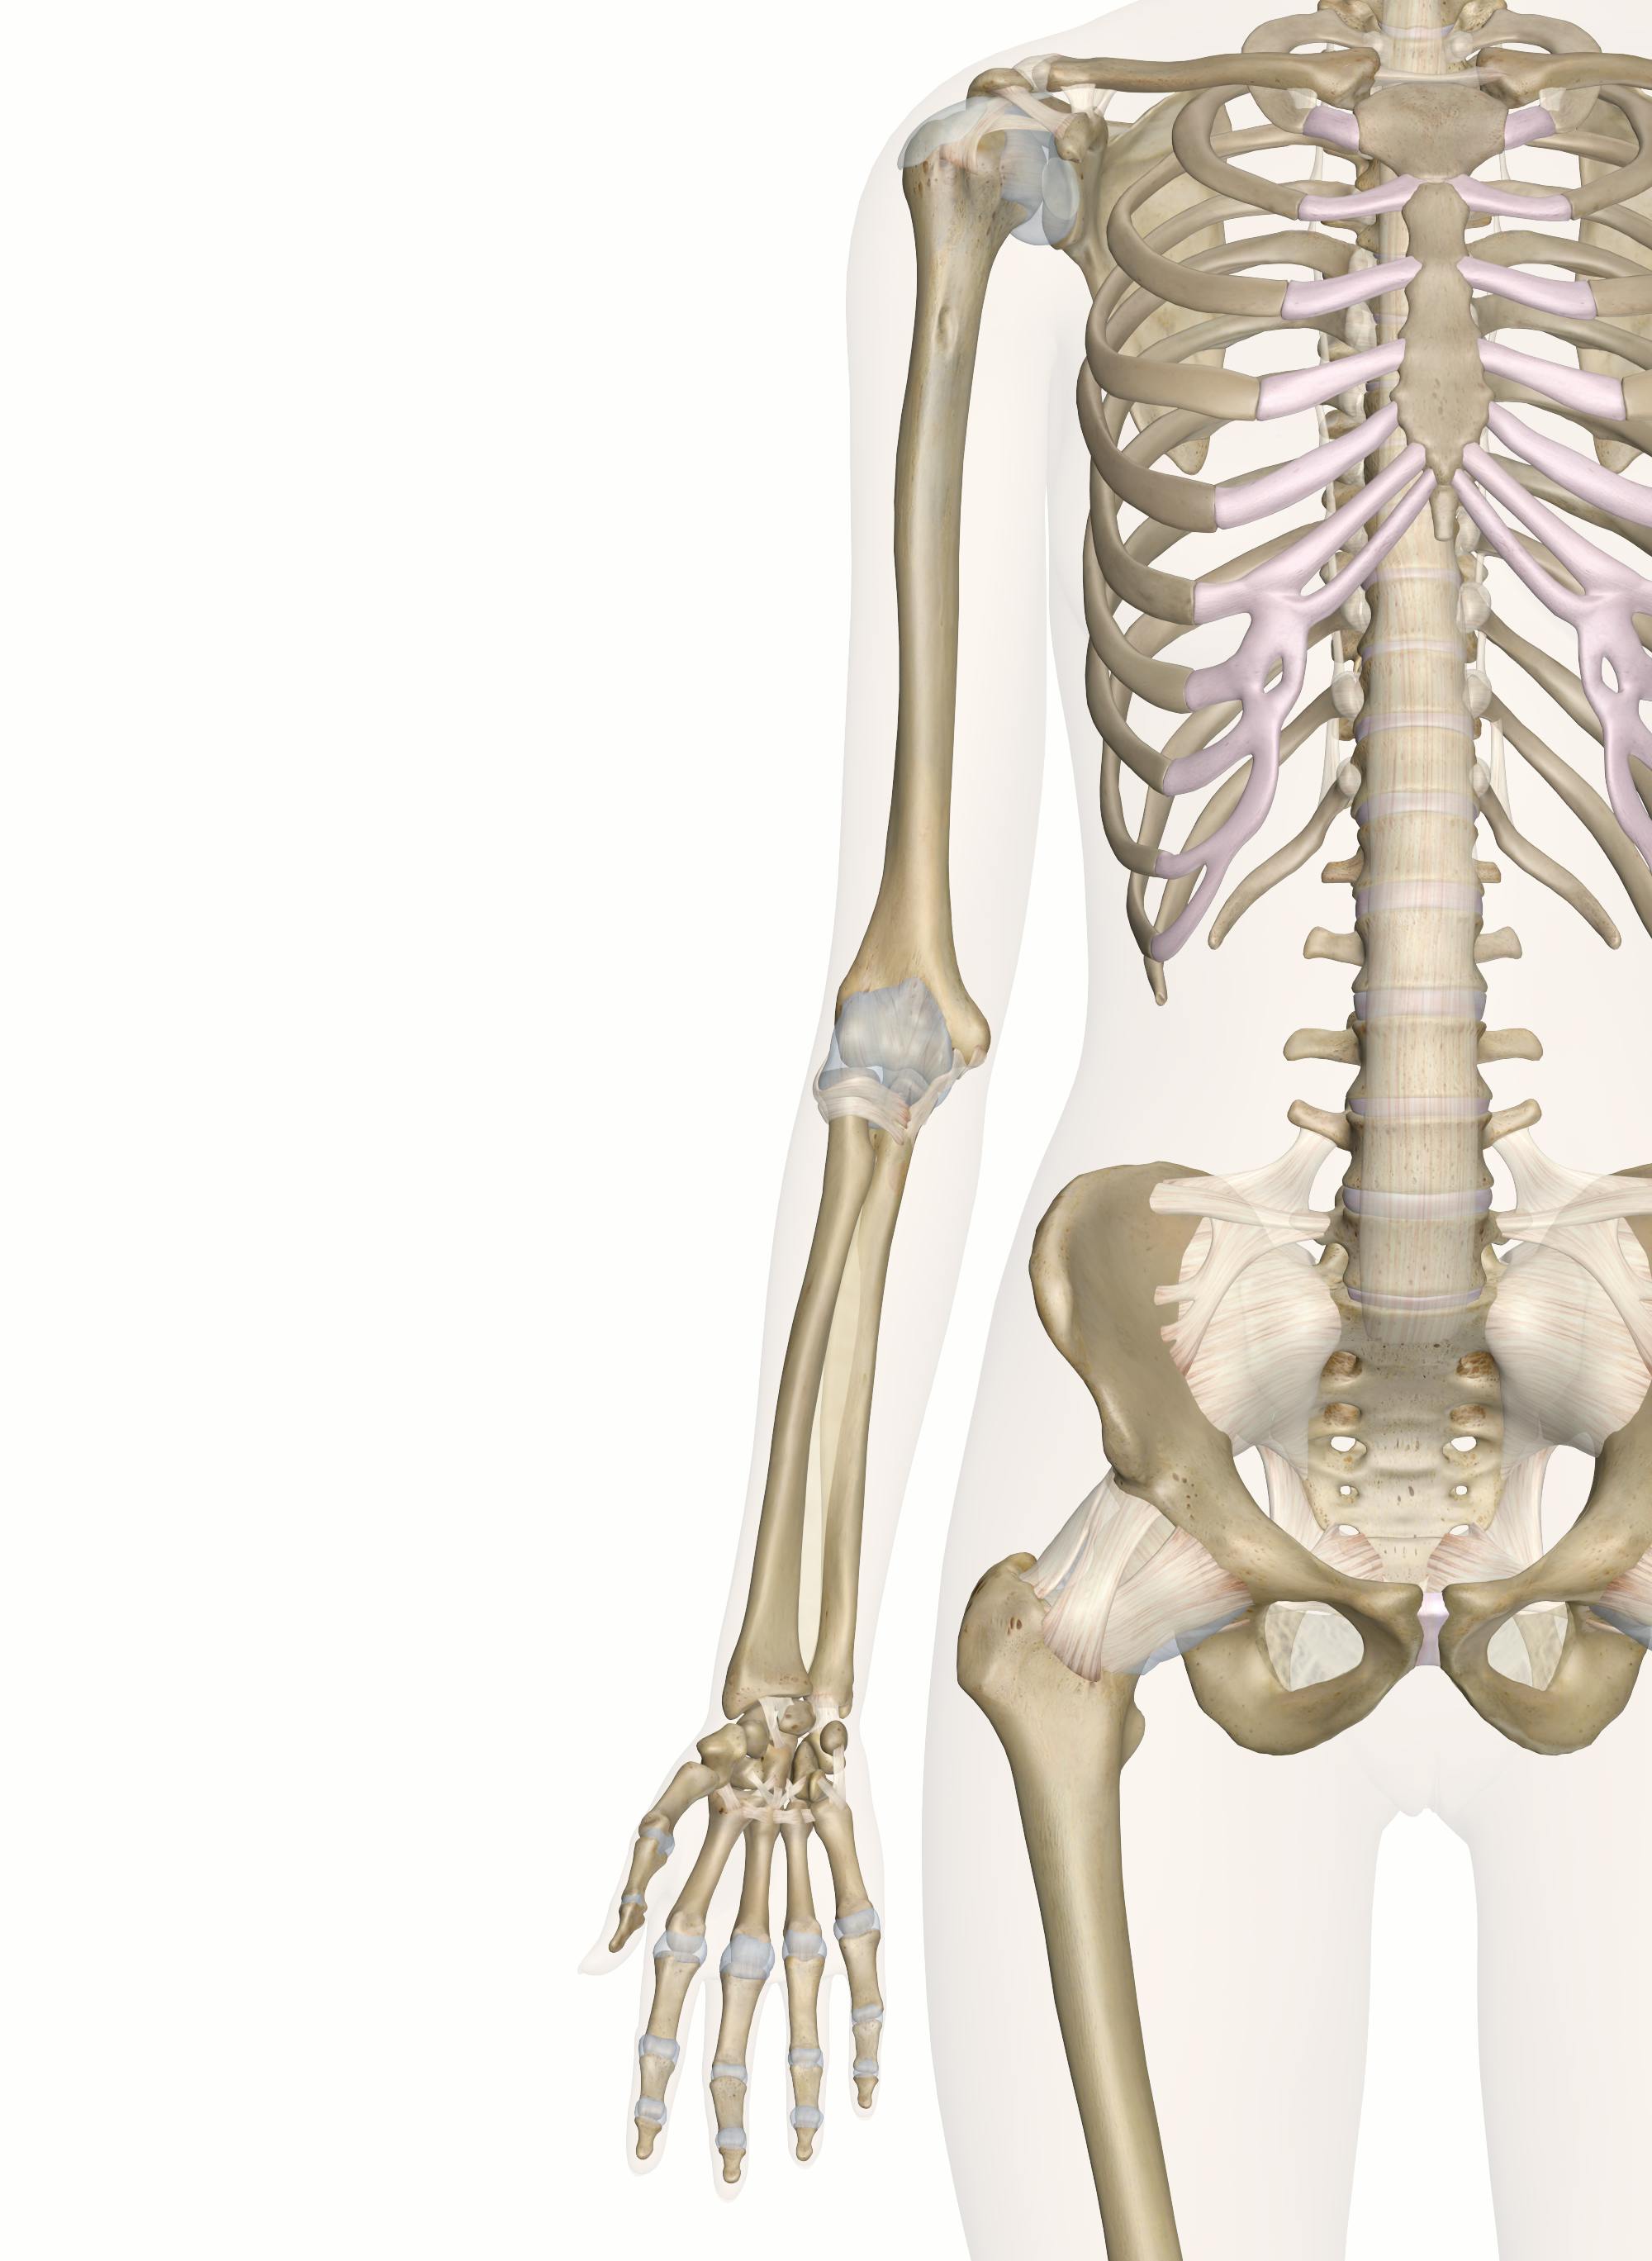 Bones of the Arm and Hand | Interactive Anatomy Guide